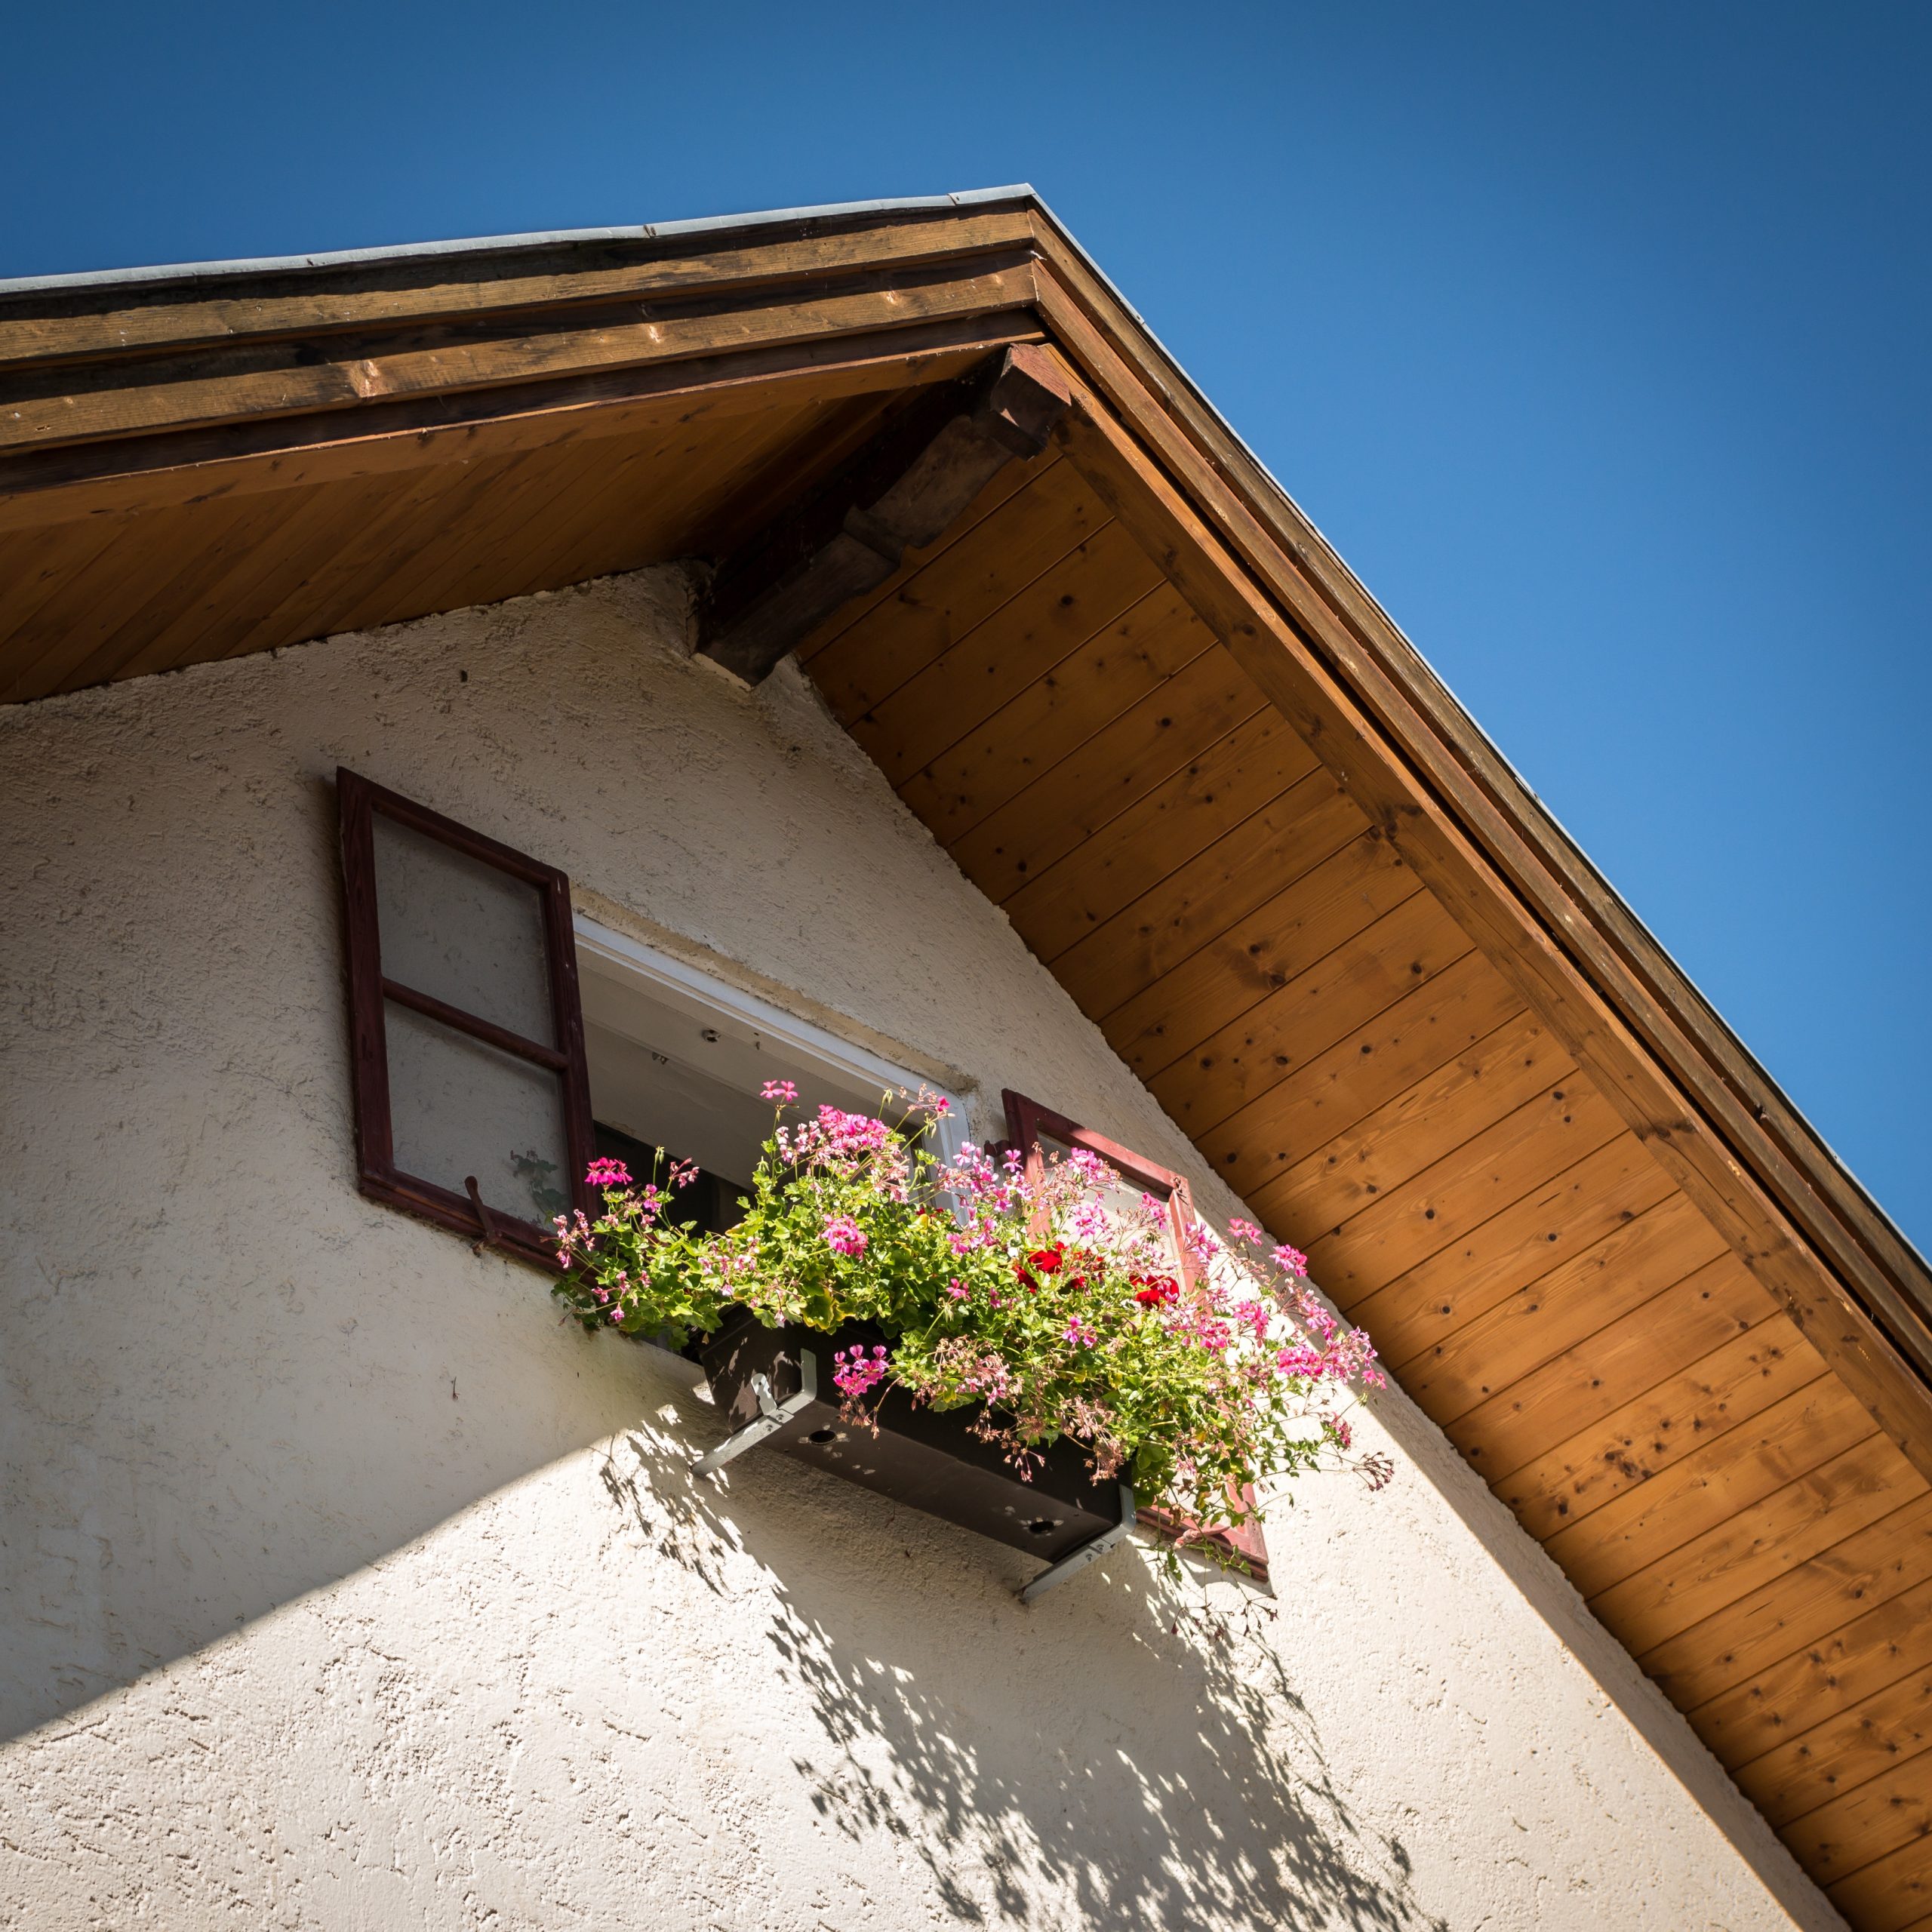 Why Choose a Gable Roof